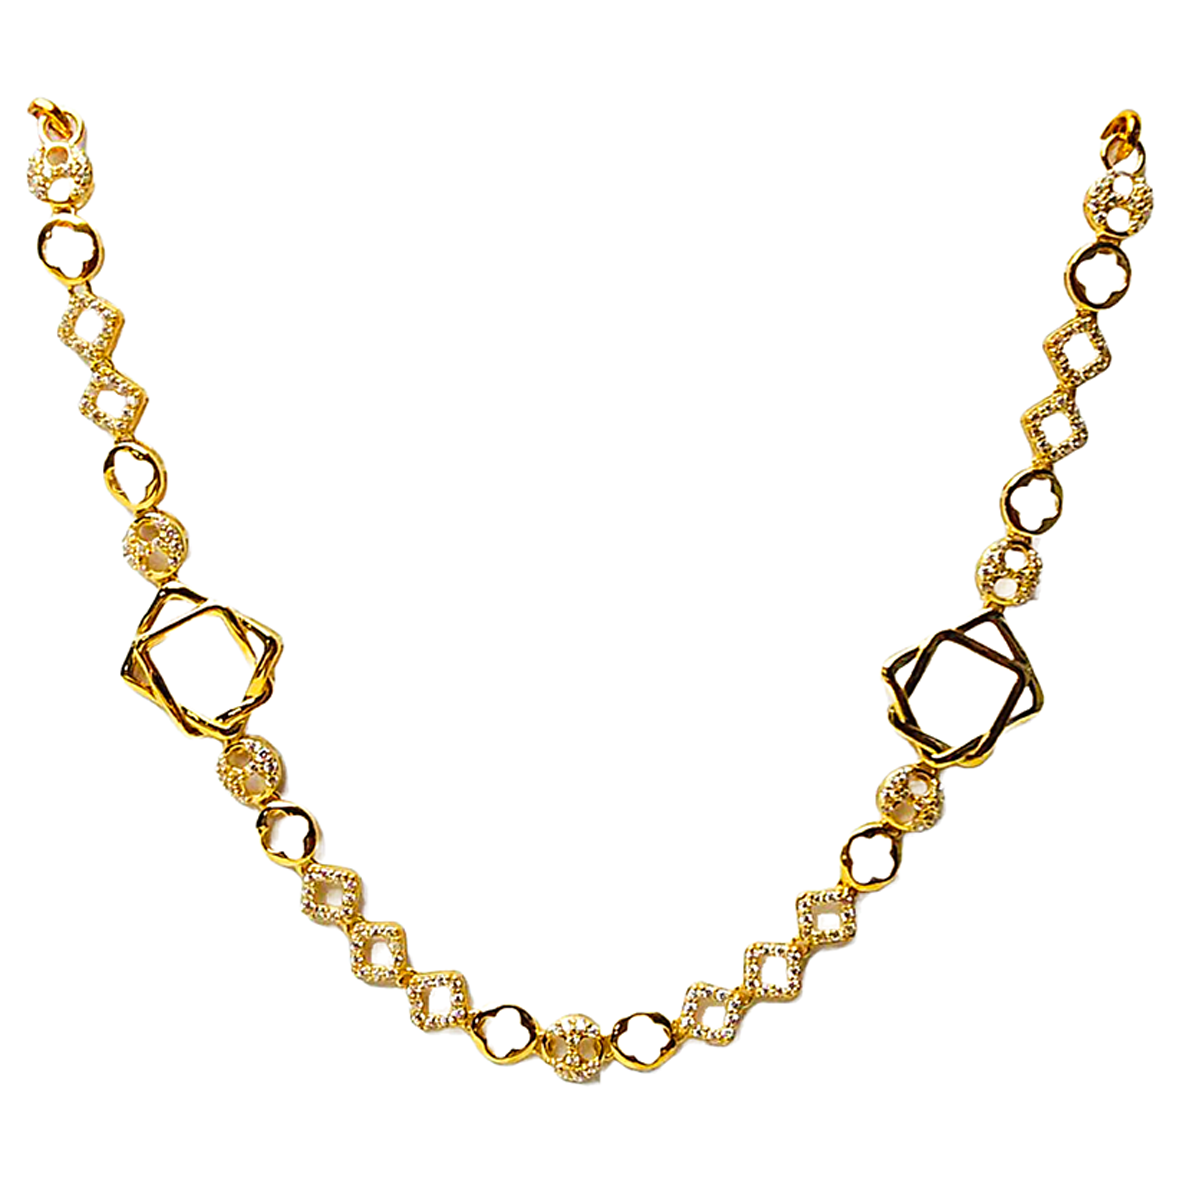 Kendric gold necklace